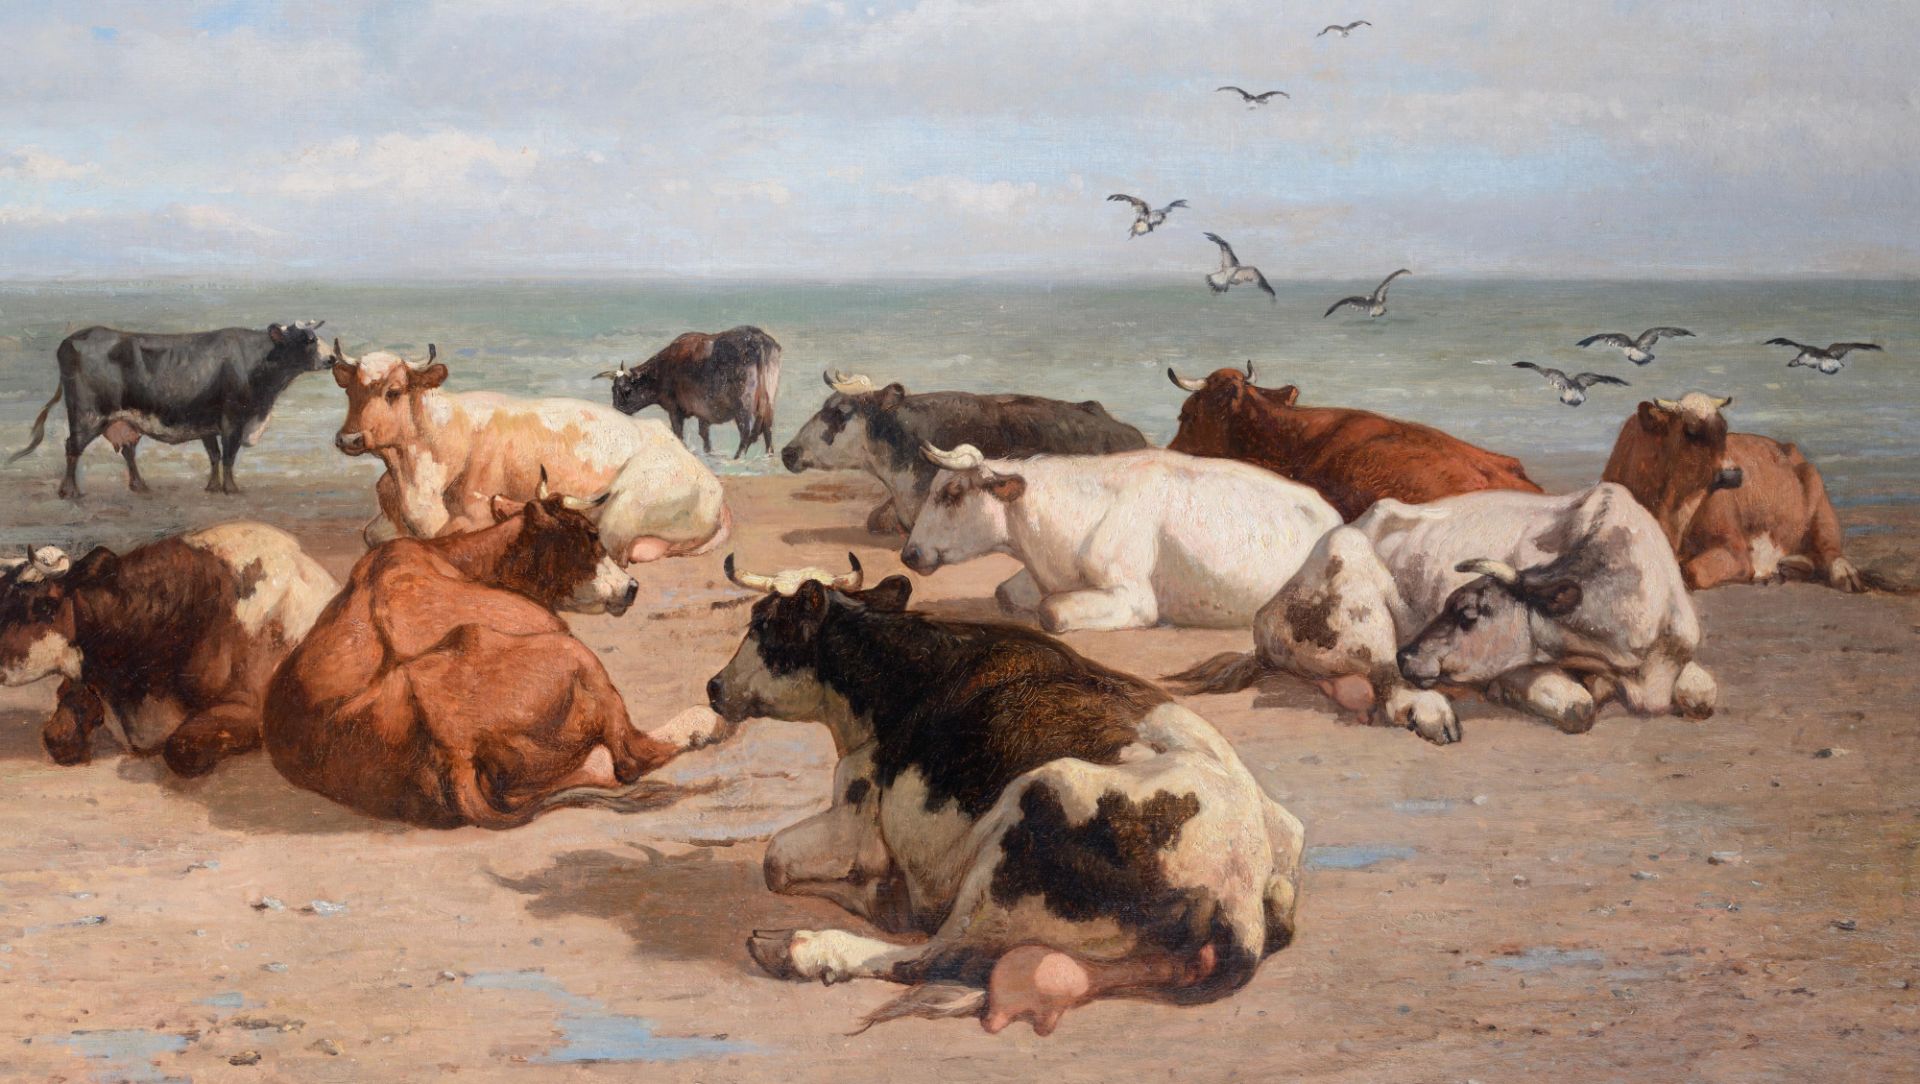 Robbe L. cows resting at the beach, dated (18)78, oil on canvas, 93 x 135 cm - Image 6 of 9